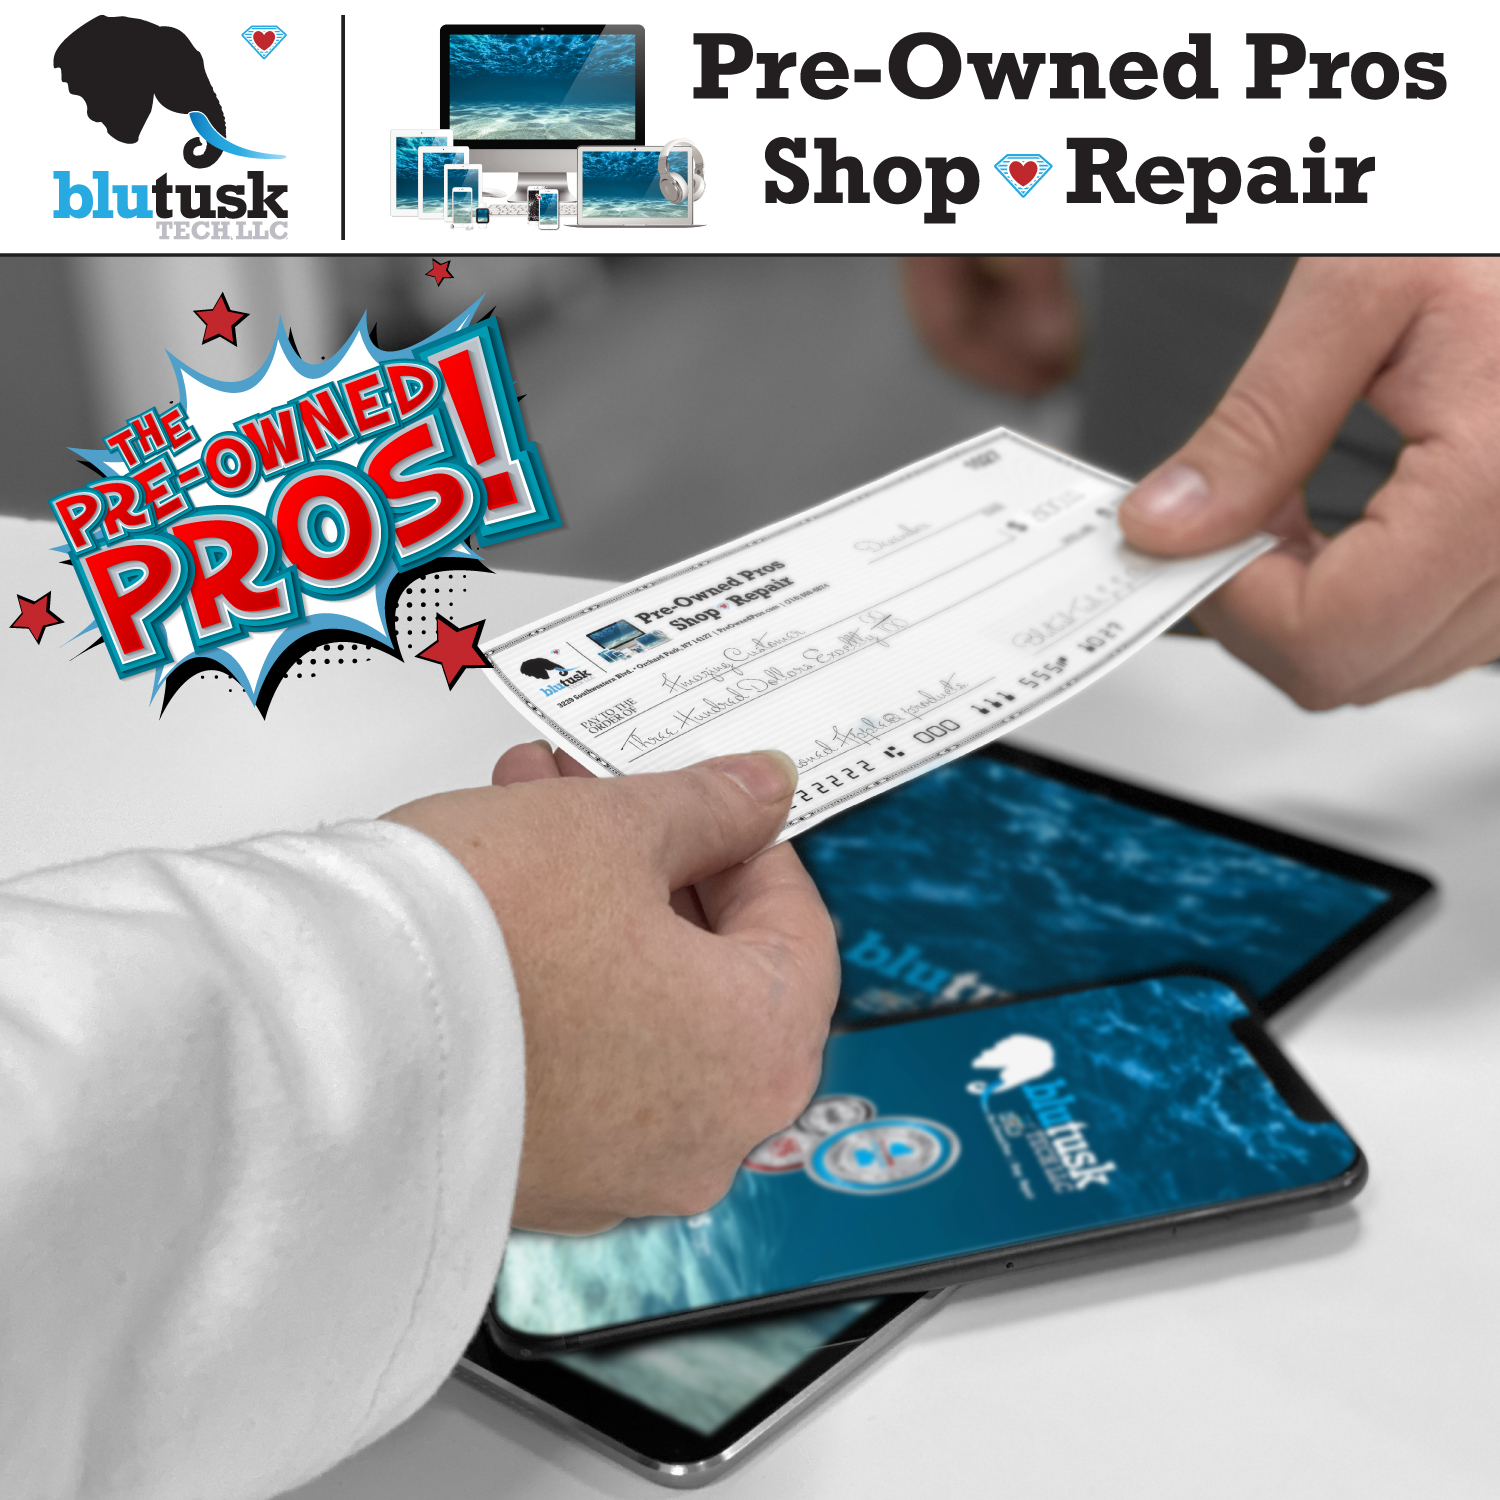 Number 8, Great Product Selection, from the top 10 reasons to shop with The Pre-Owned Pros at Blutusk Tech, LLC 